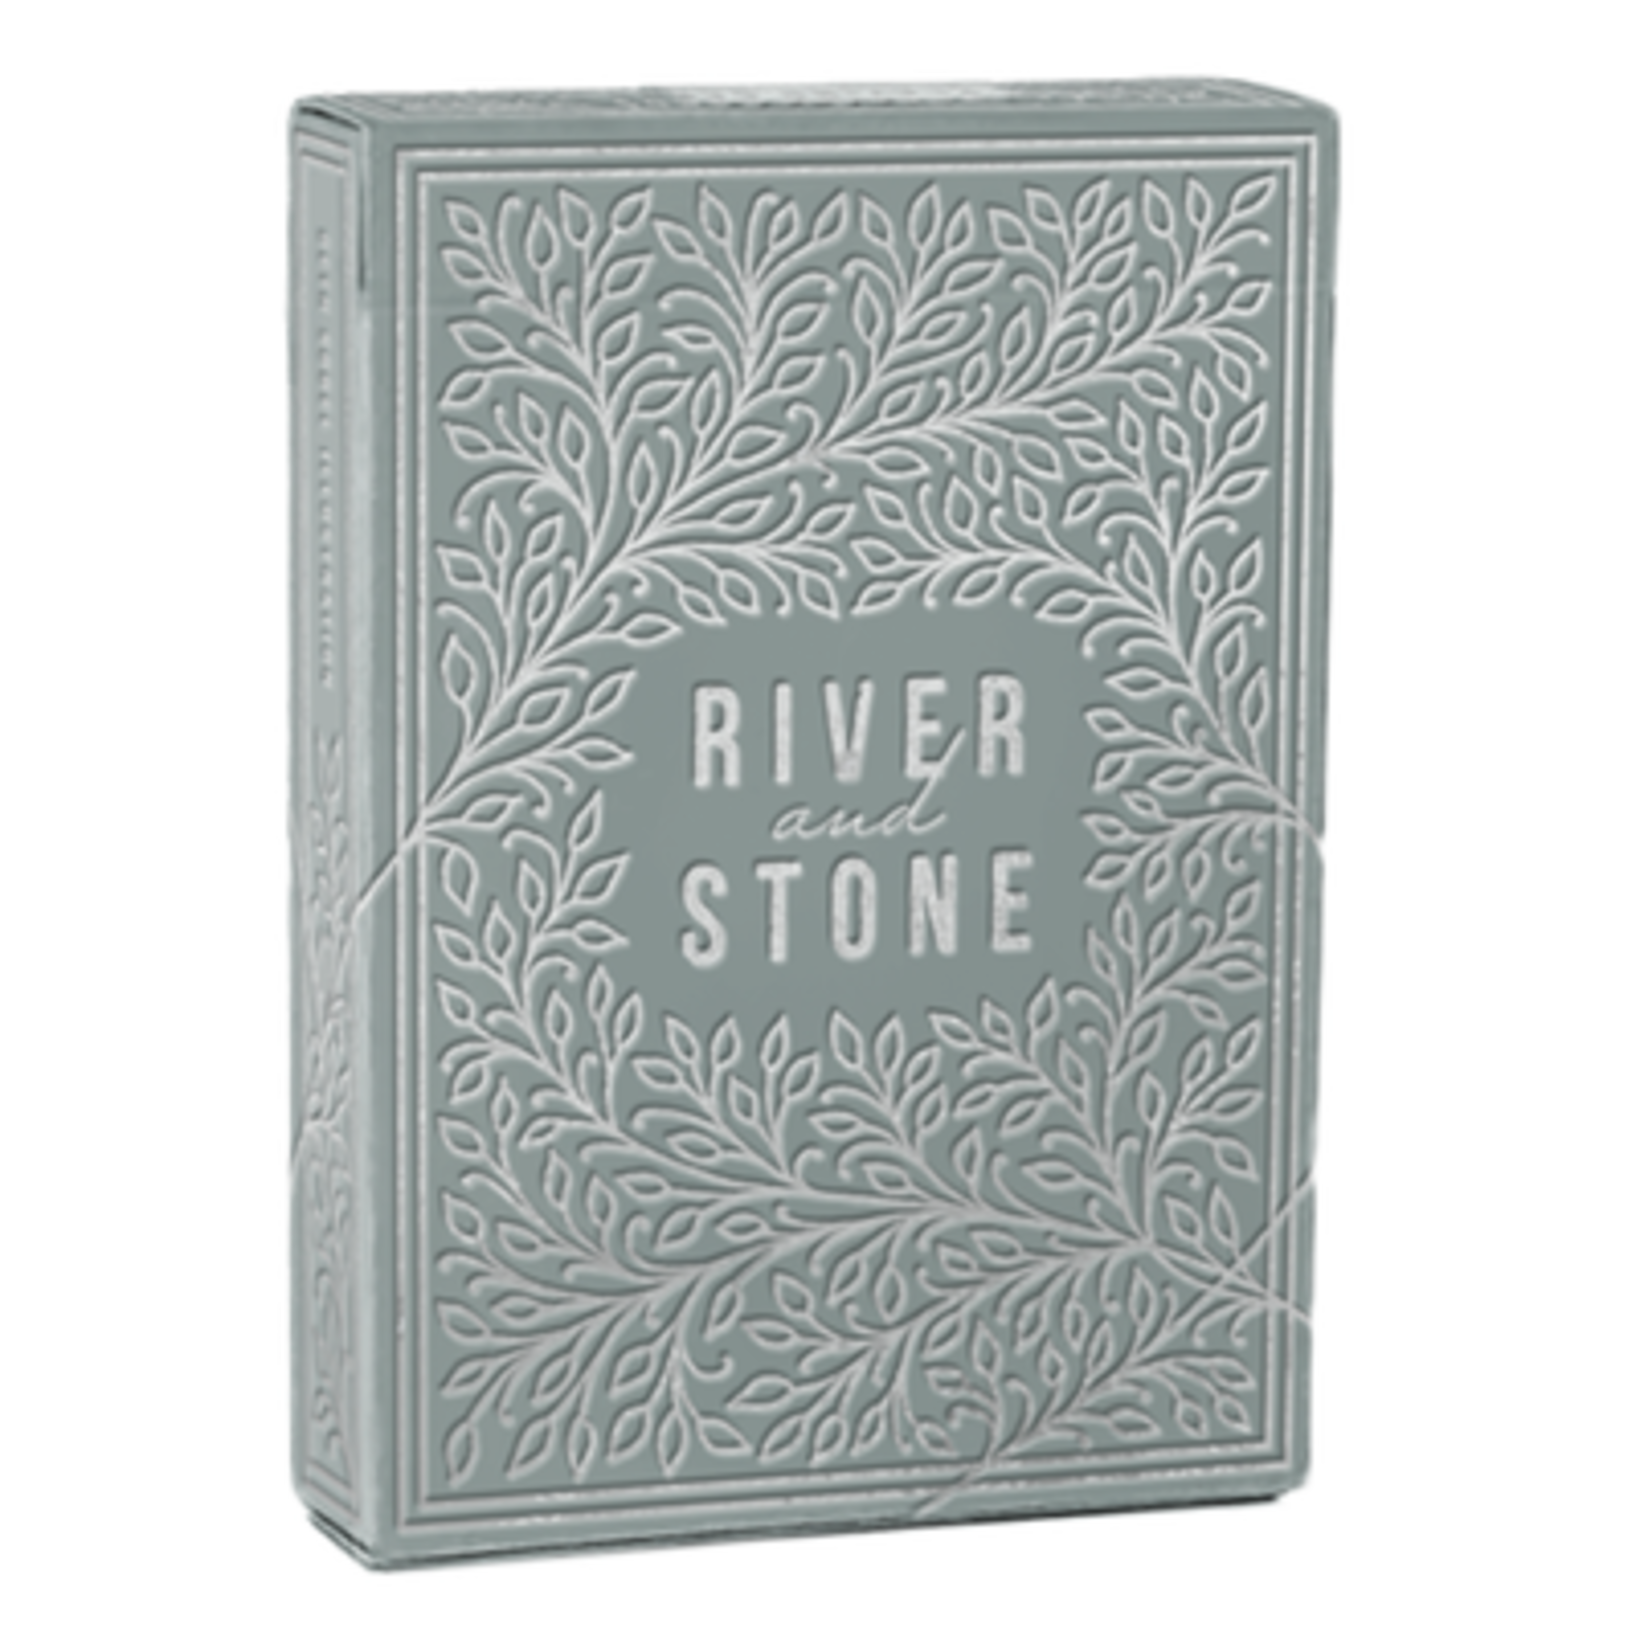 Beth Sobel Card Deck: River and Stone